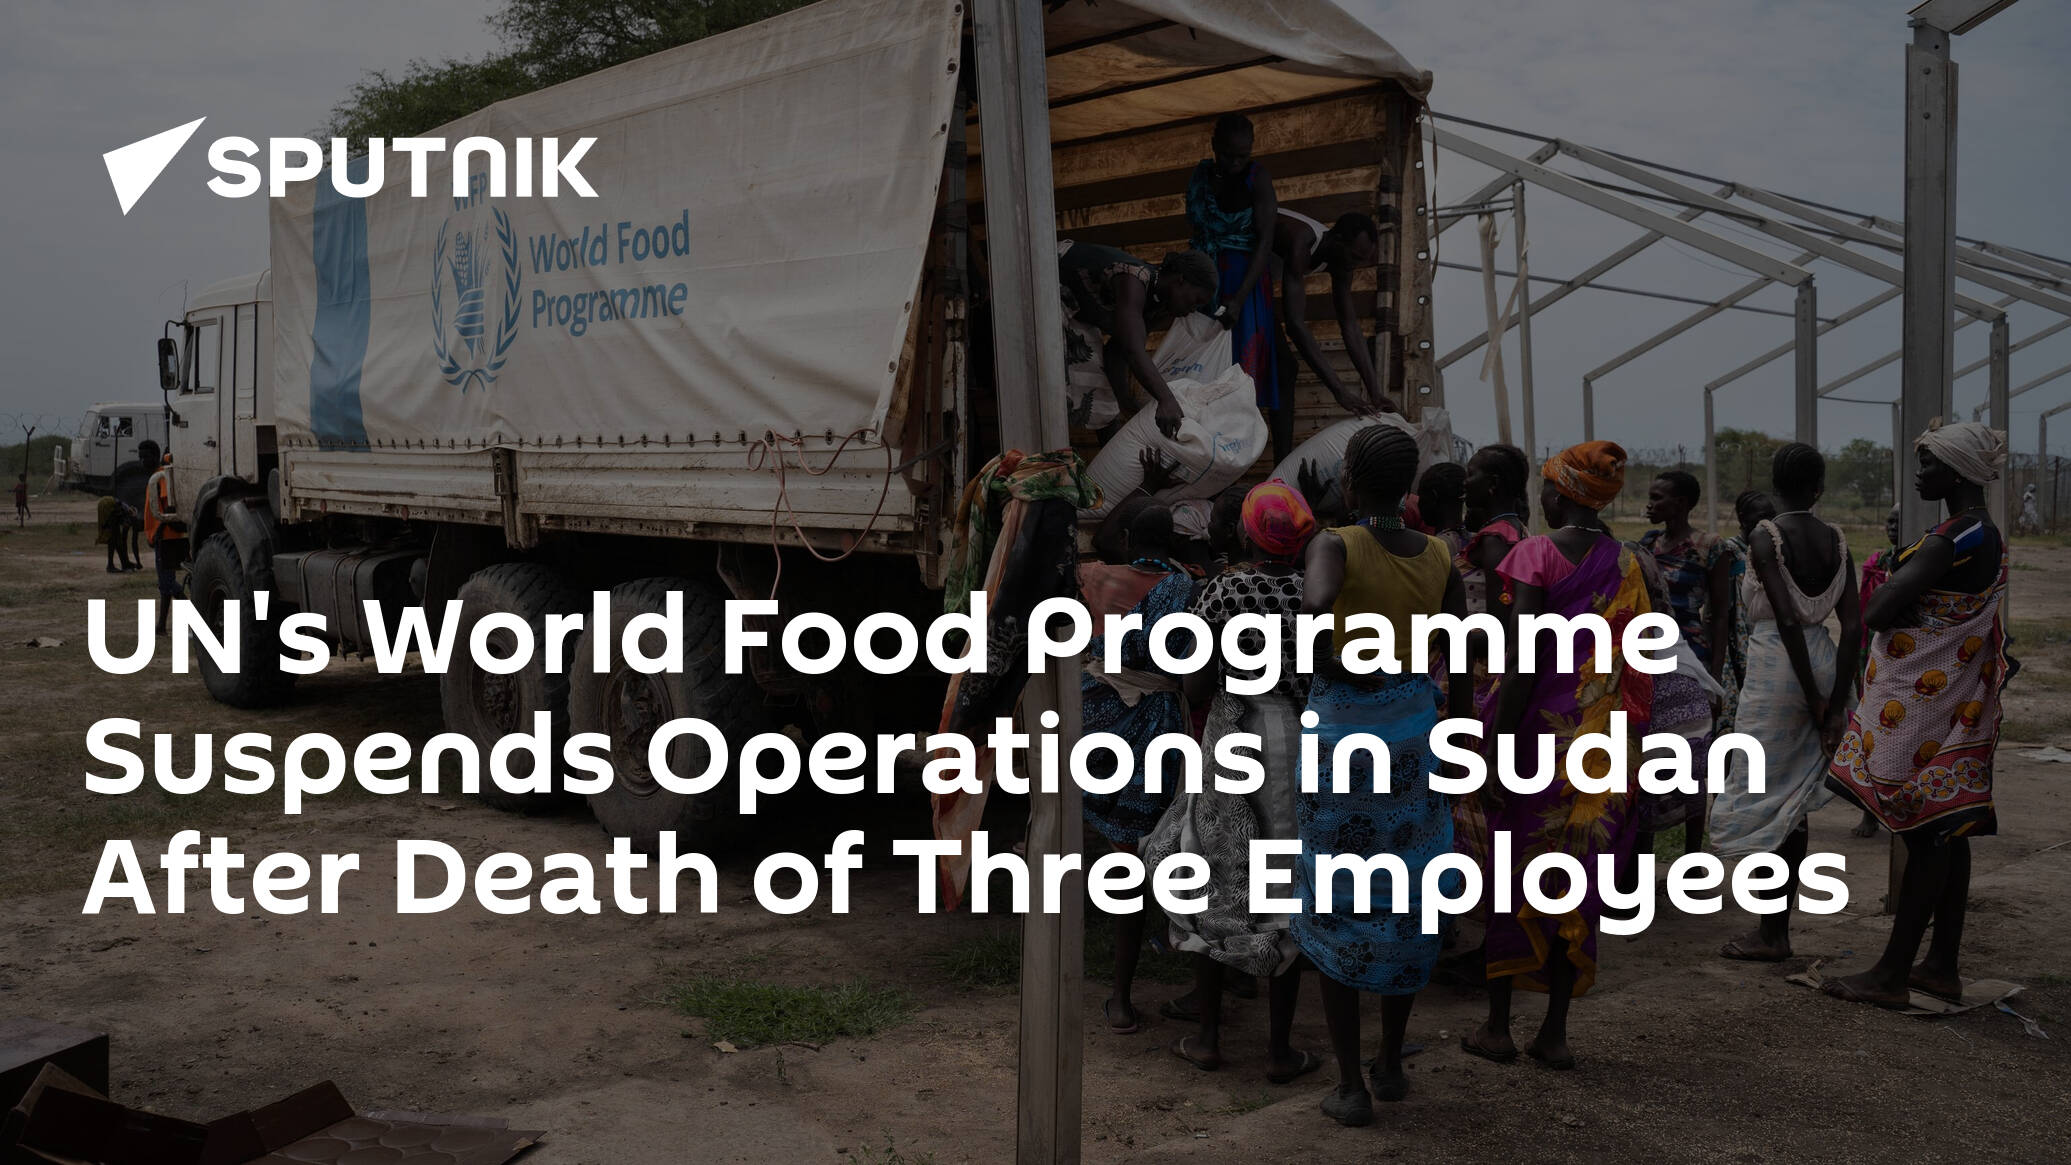 UN's World Food Programme Suspends Operations in Sudan After Death of Three Employees